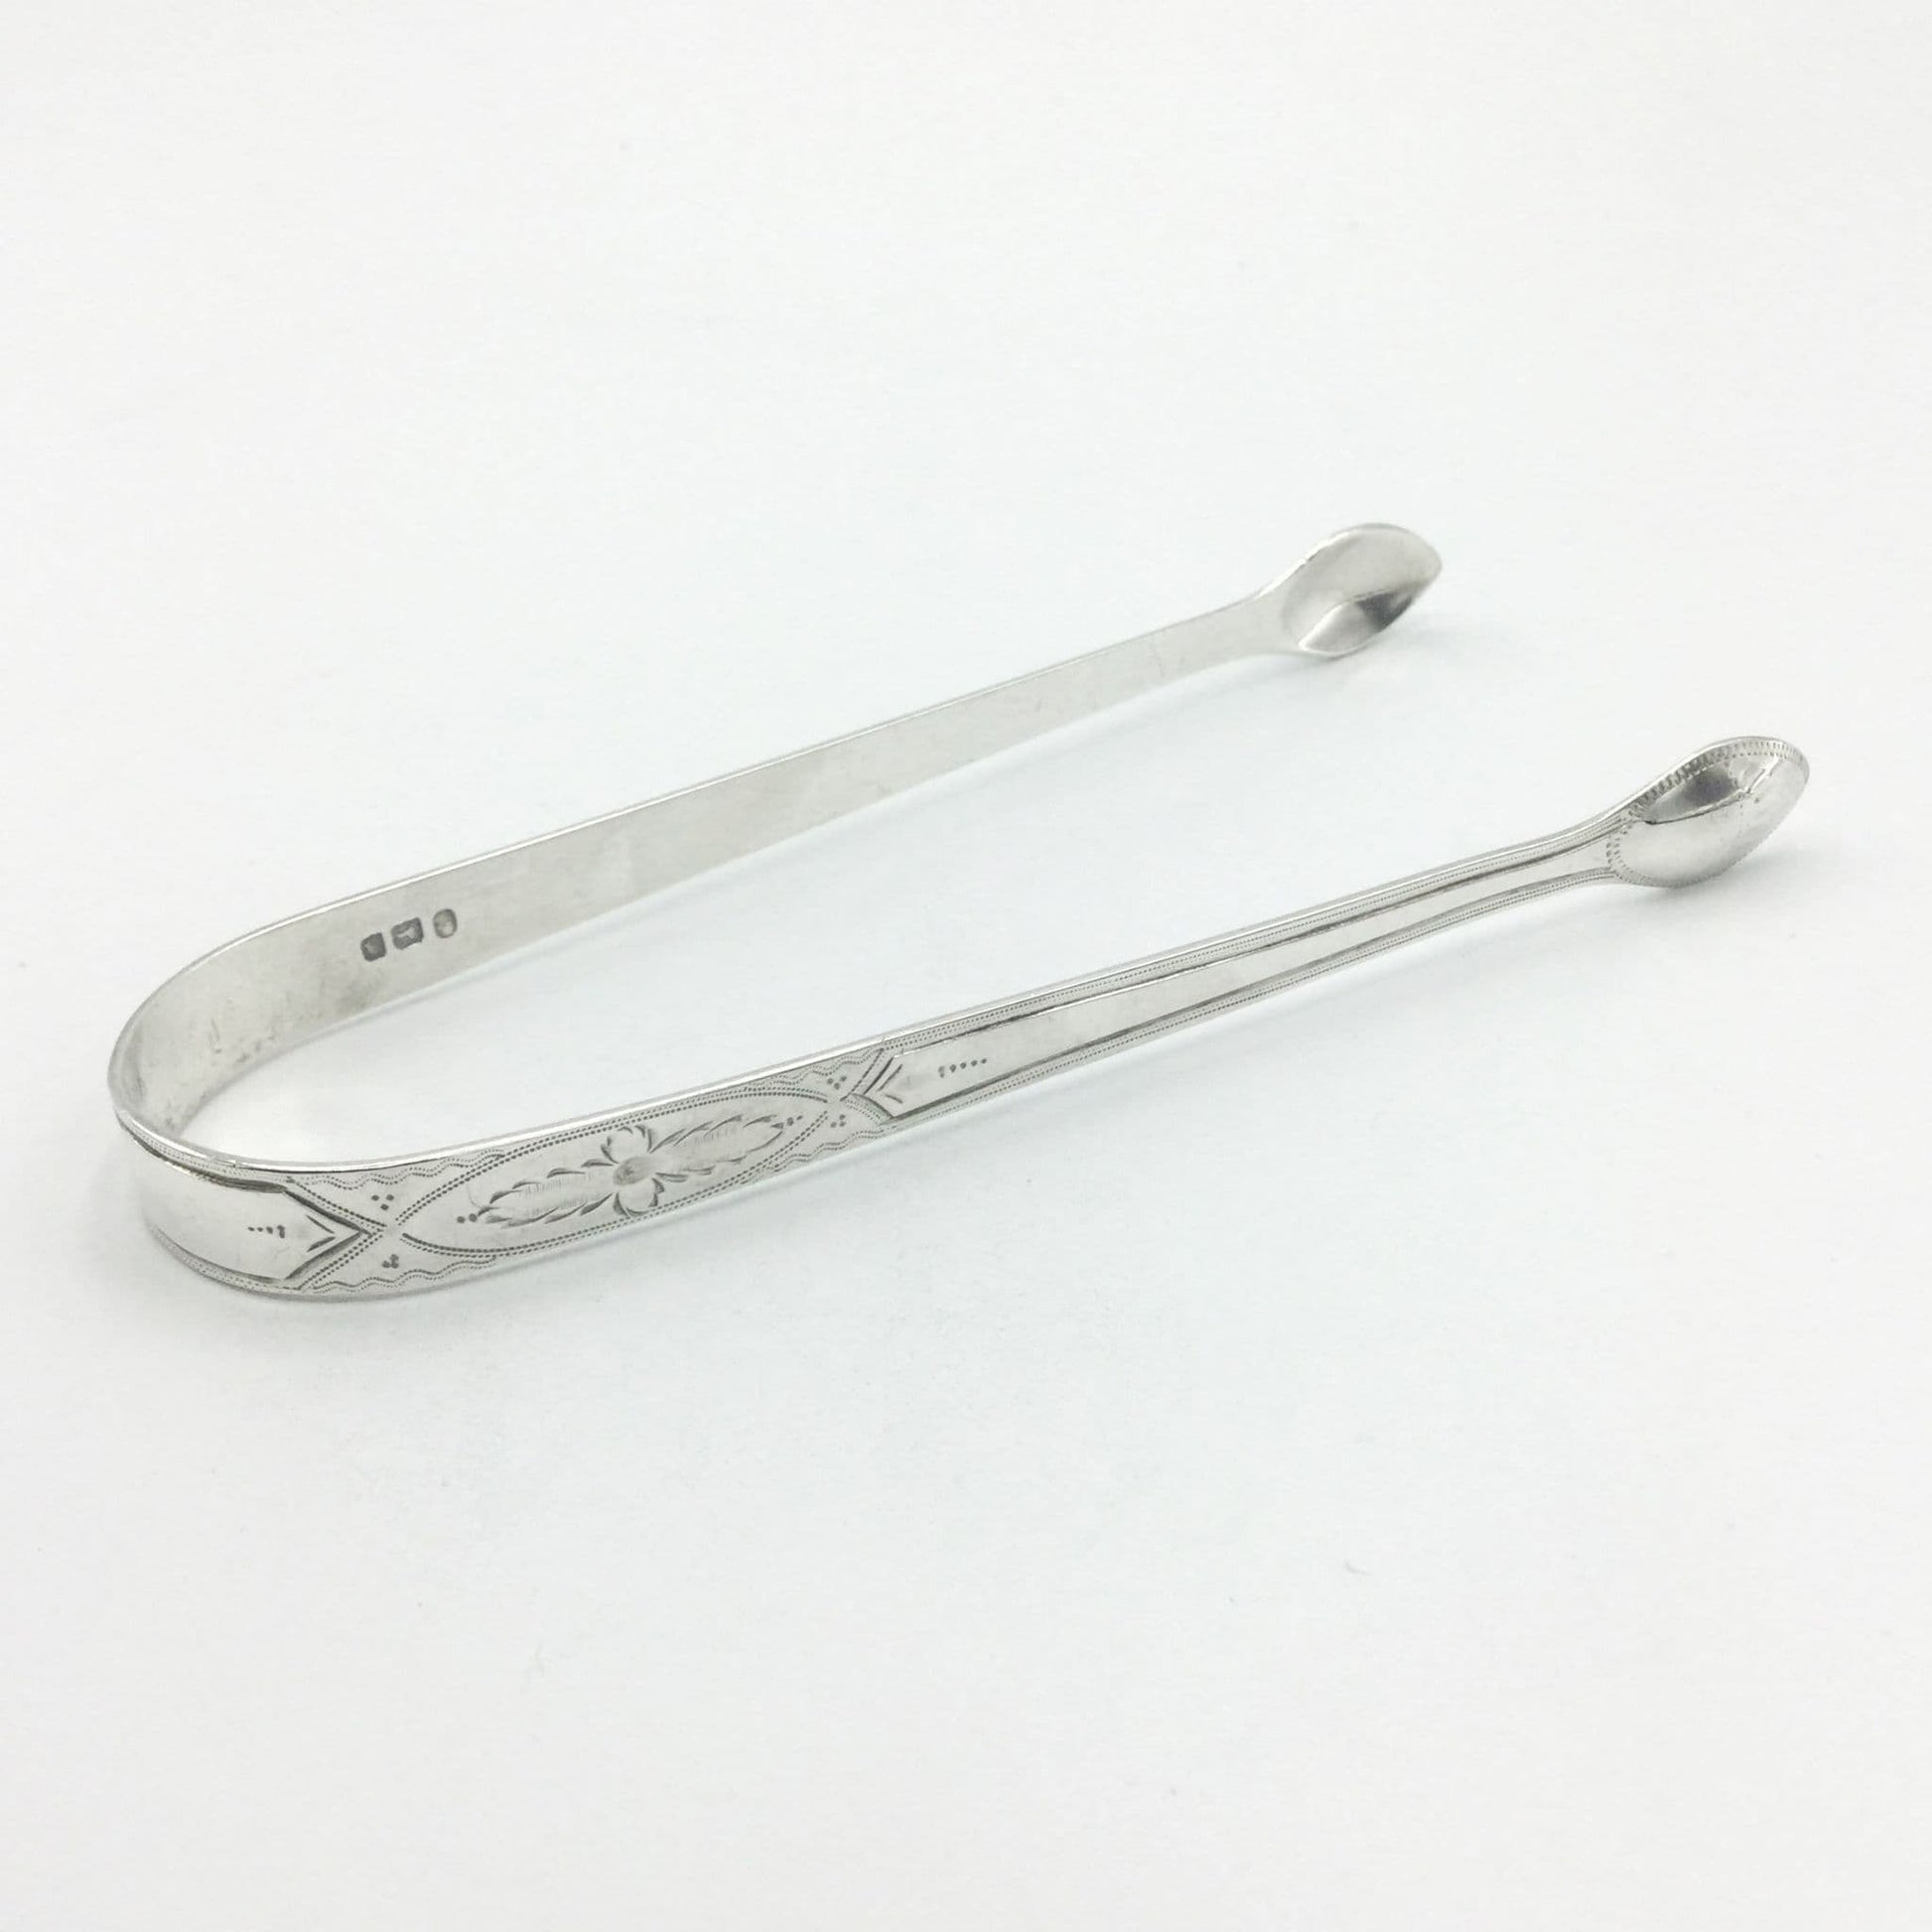 1700s Silver sugar tongs with a pretty floral engraved design on a white background